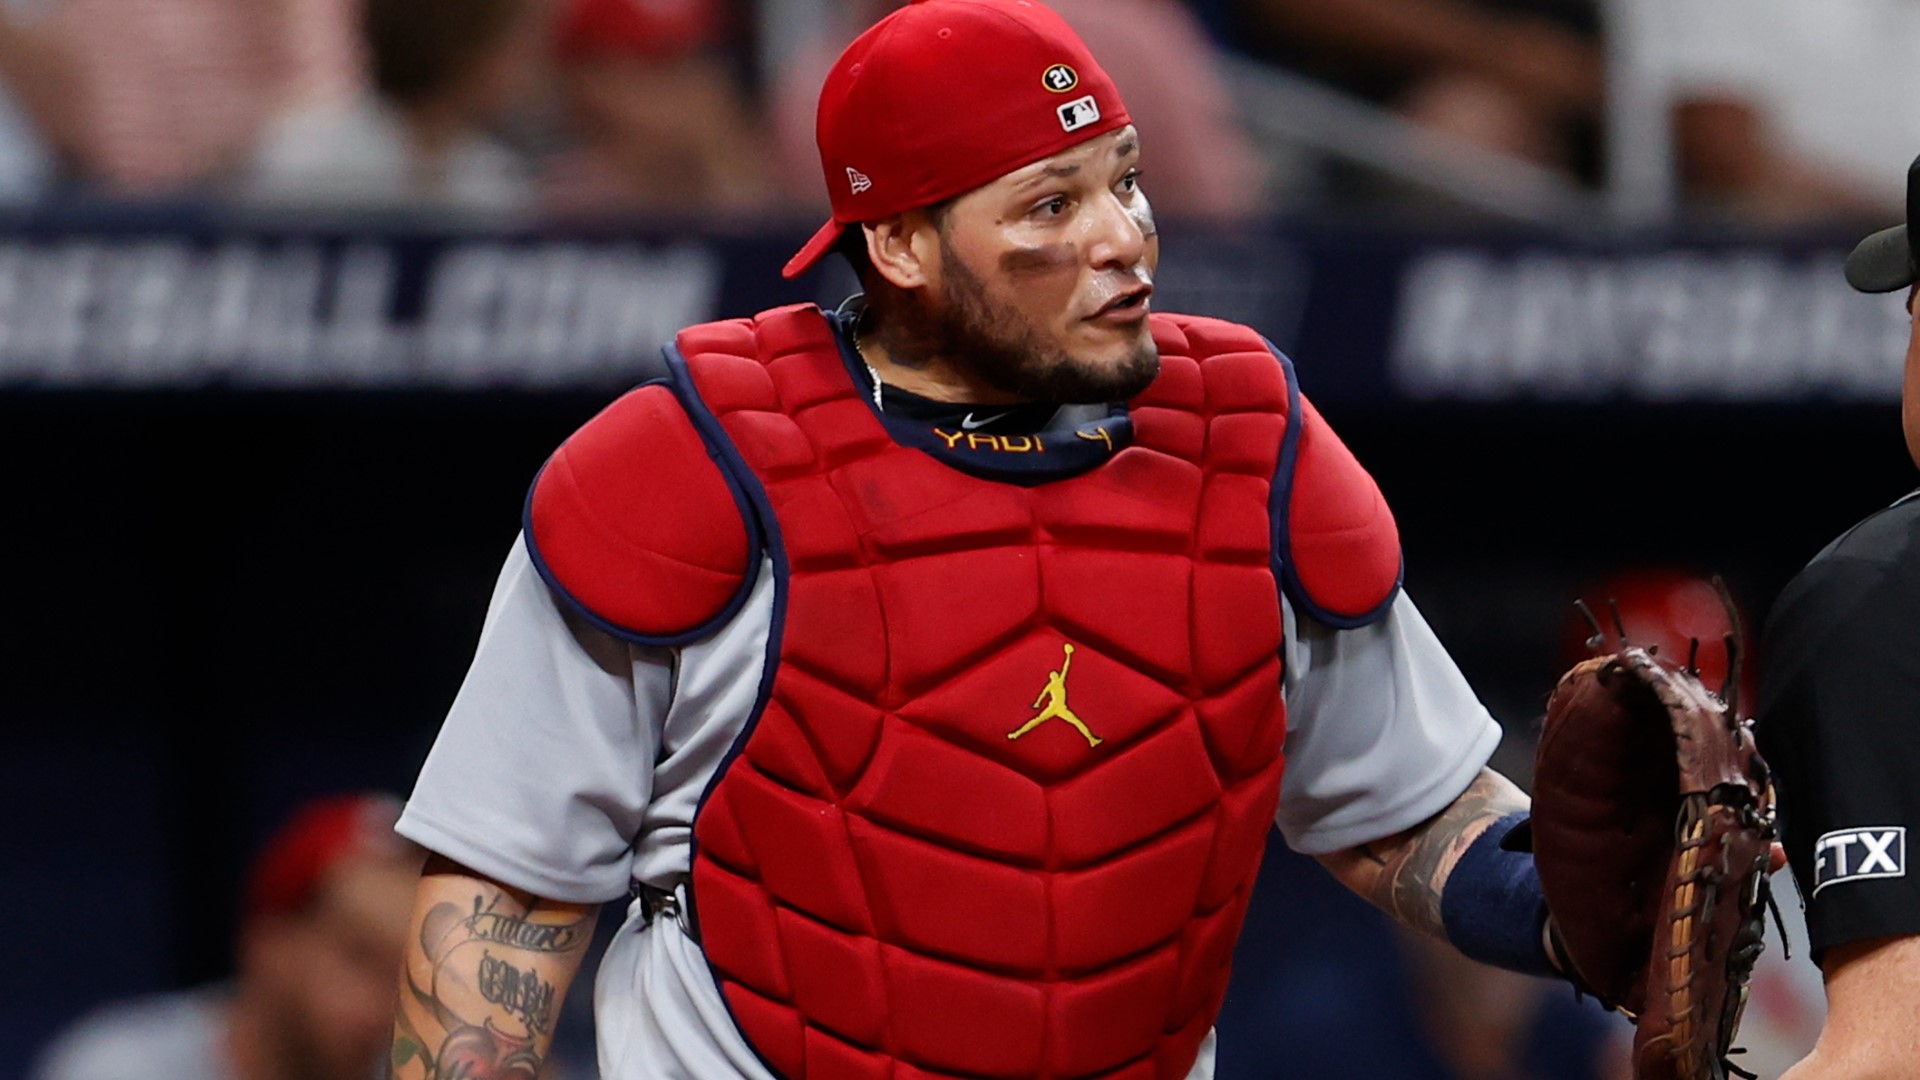 Molina is still on the IL for the Cardinals, but he managed to make headlines this weekend at a basketball game in Puerto Rico